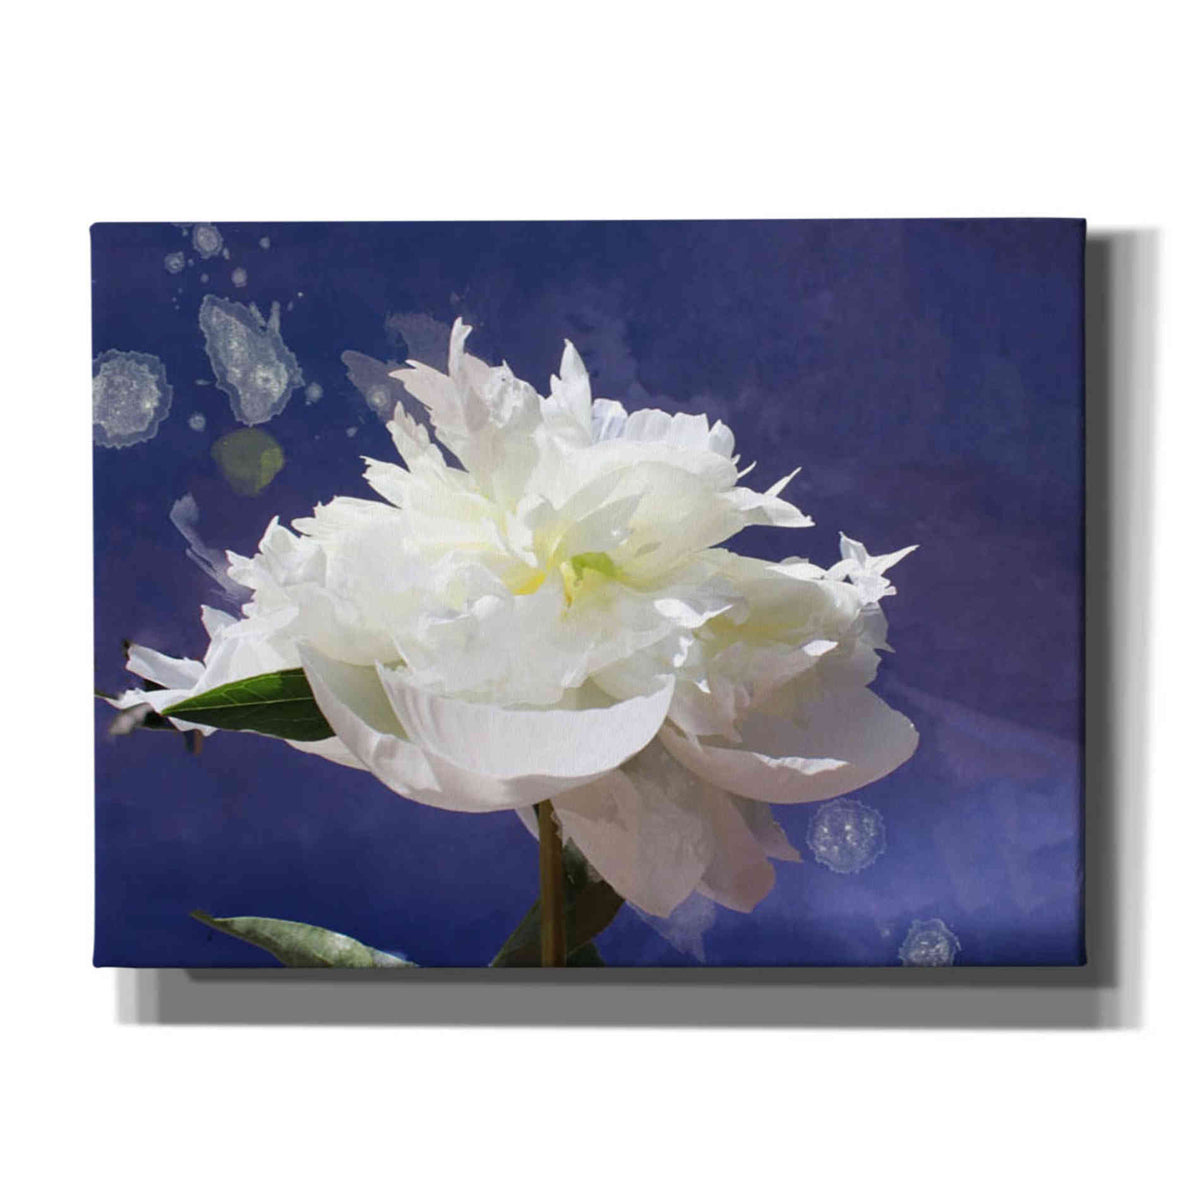 Epic Graffiti &#39;White Peony-Scents of Heaven&#39; by Irena Orlov, Giclee Canvas Wall Art